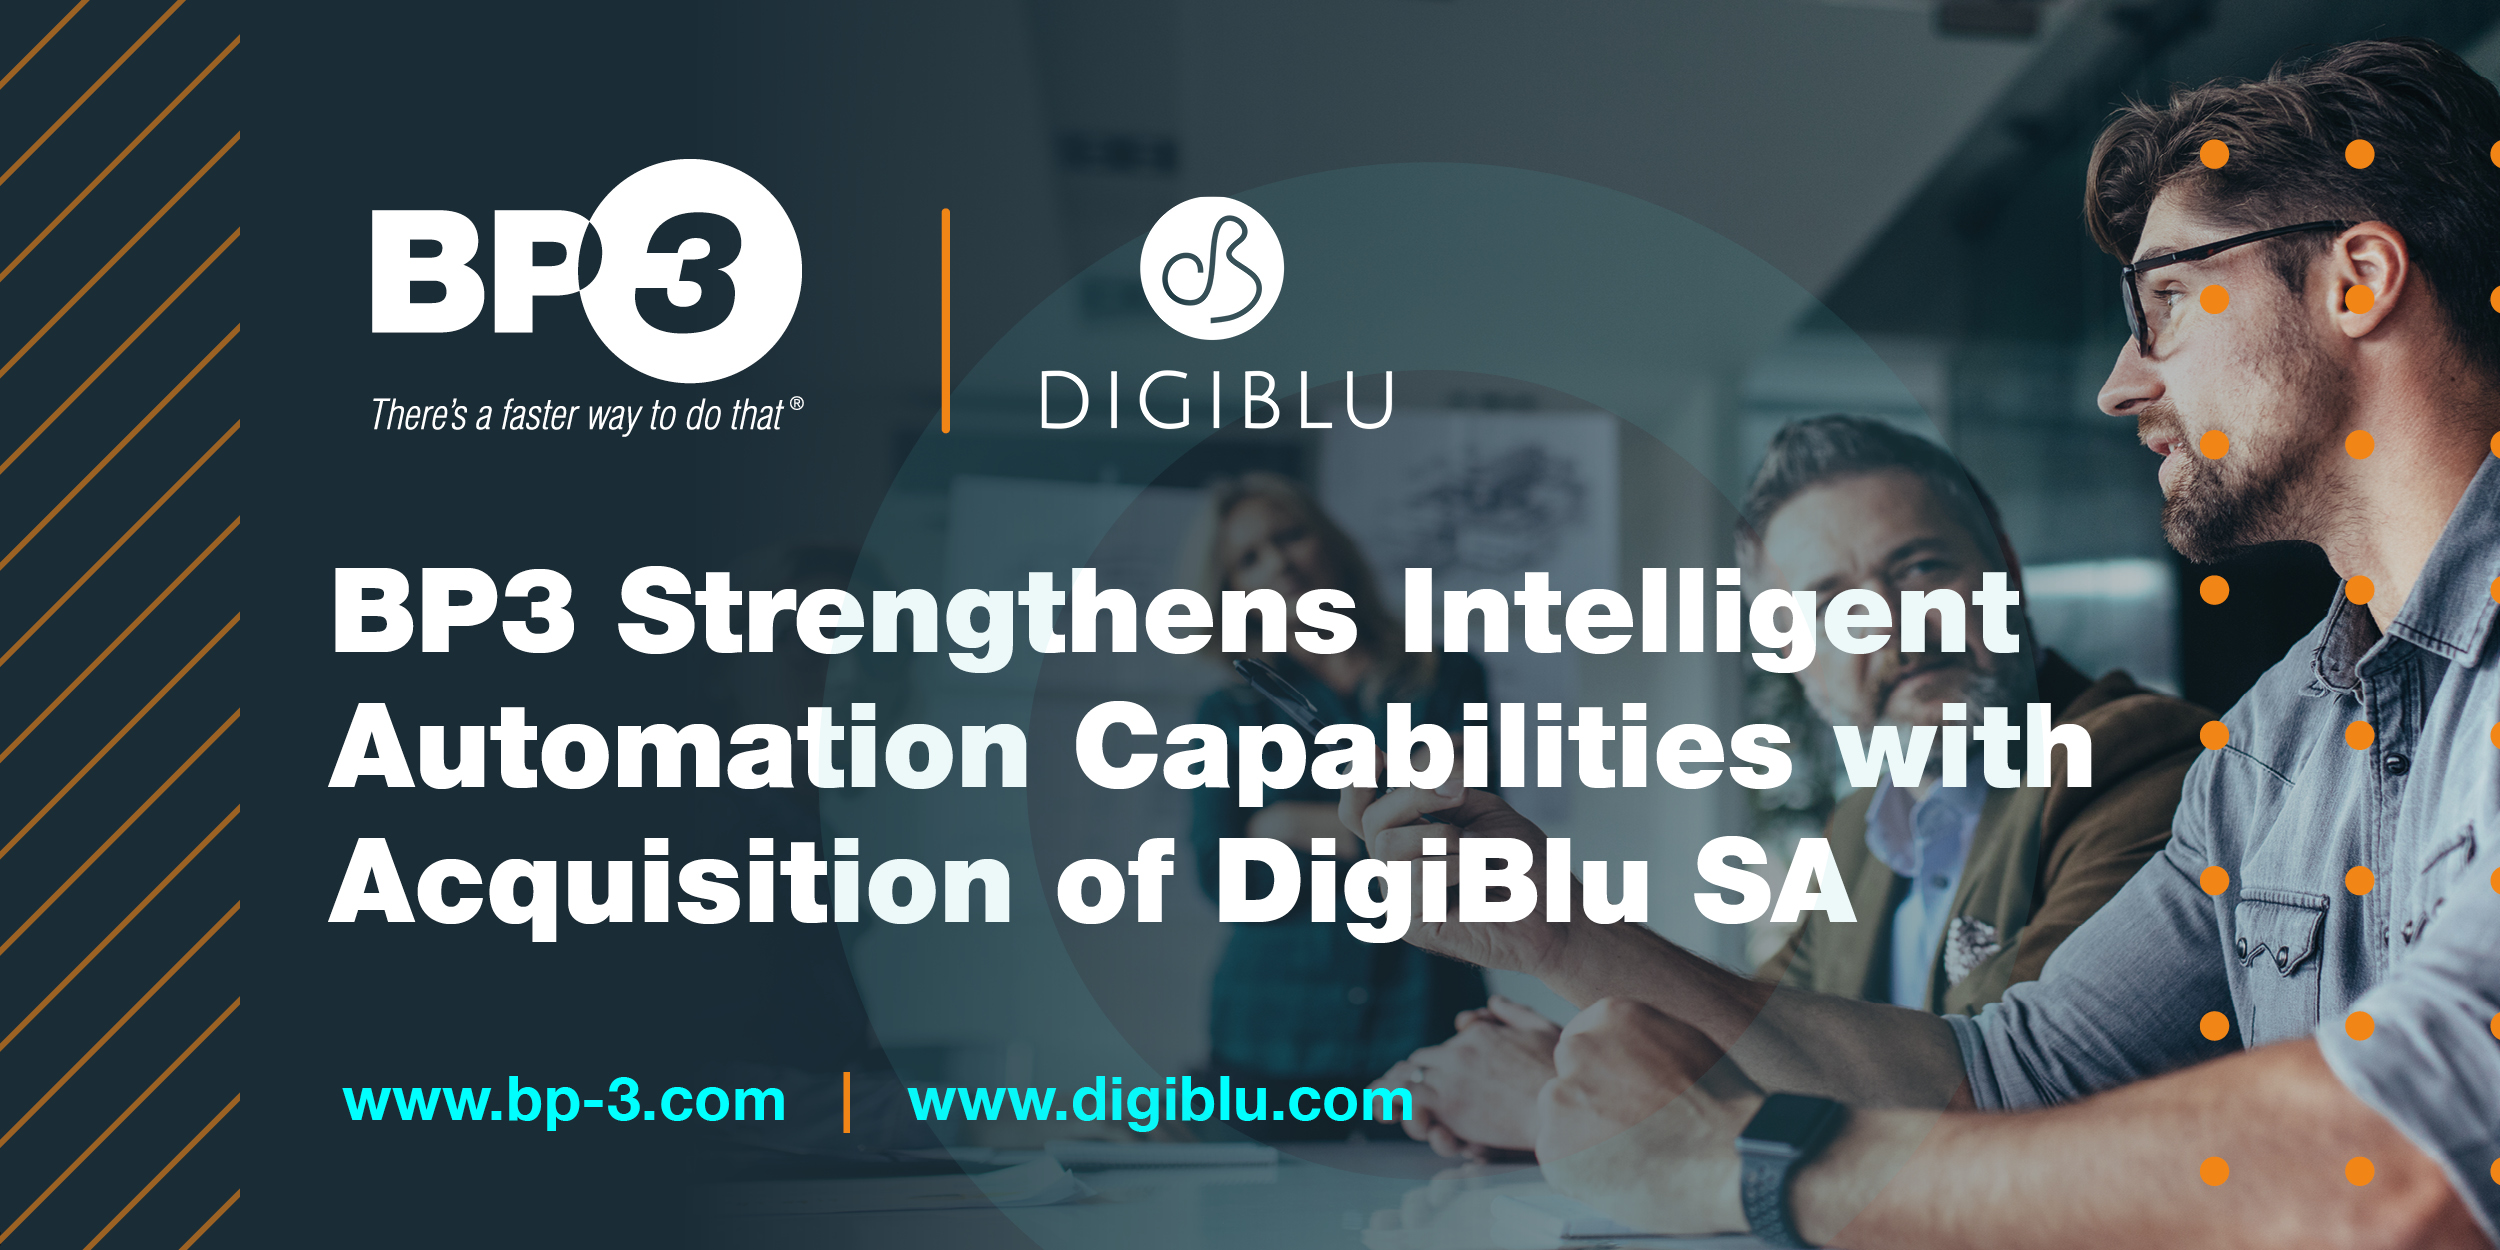 BP3 Strengthens Intelligent Automation Capabilities with Acquisition of DigiBlu SA